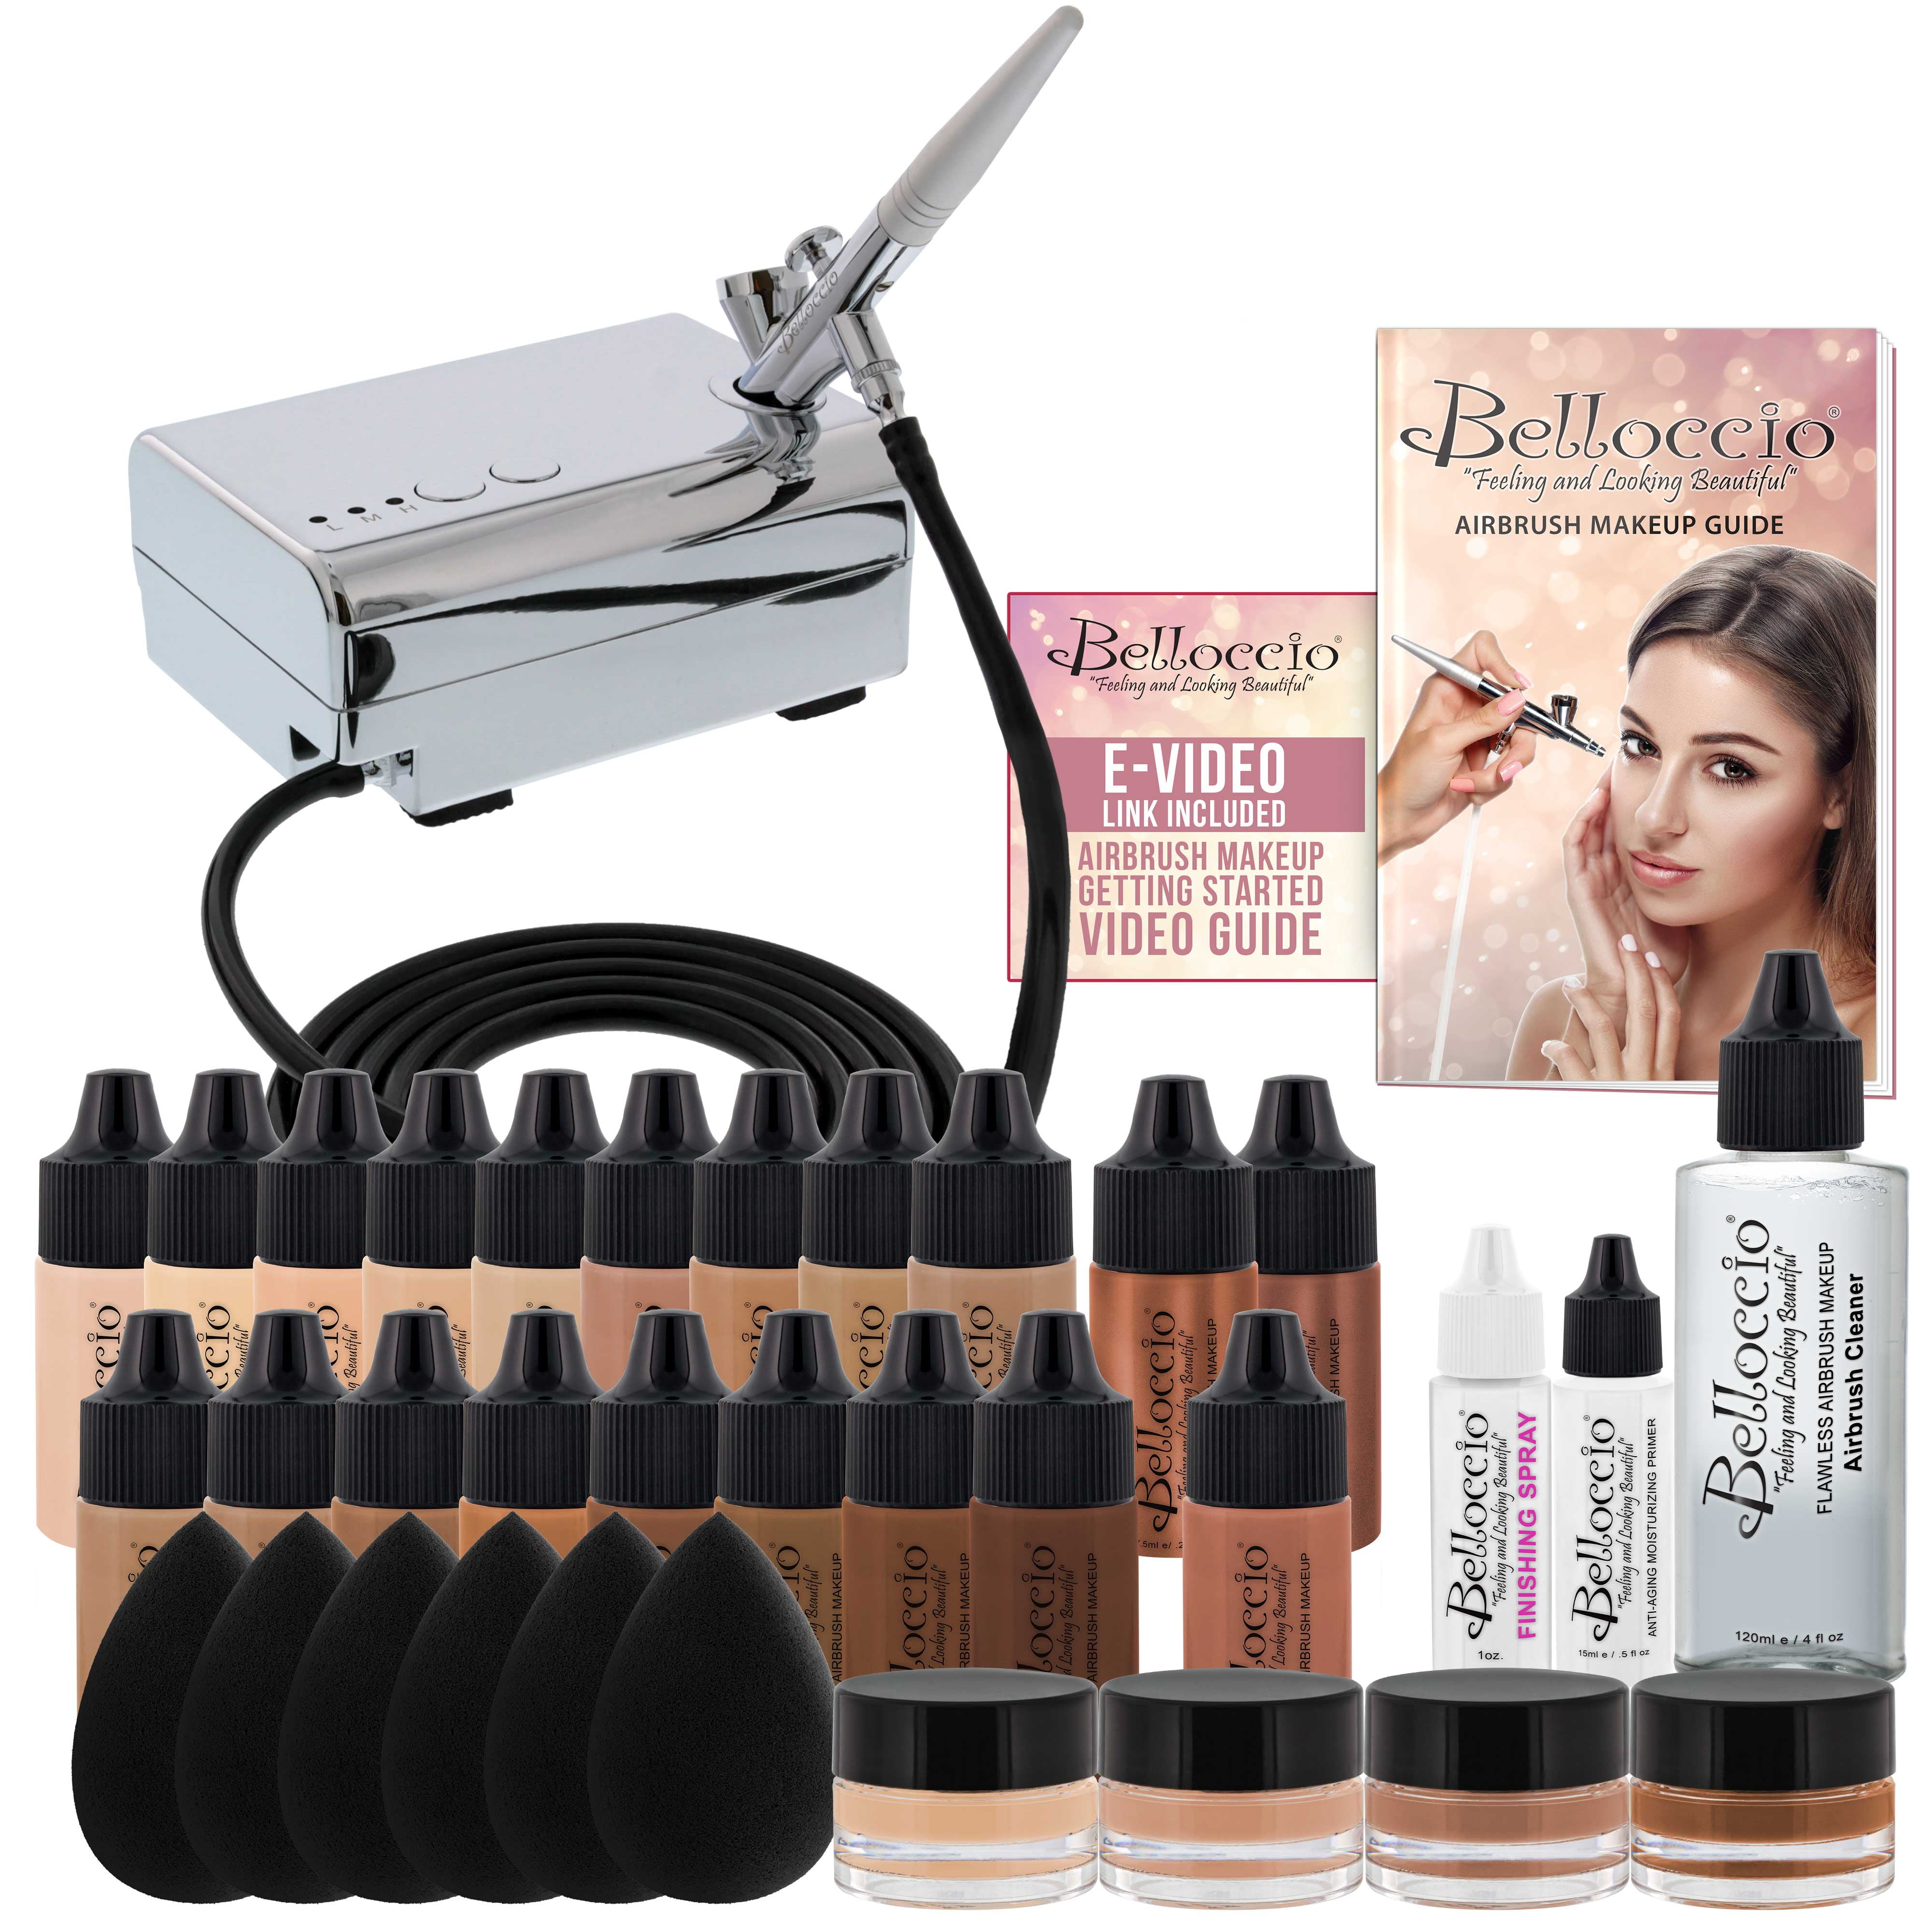 Complete Professional Belloccio Airbrush Cosmetic Makeup with MASTER SET of All 17 Foundation Color Shades in 1/4 oz - Walmart.com